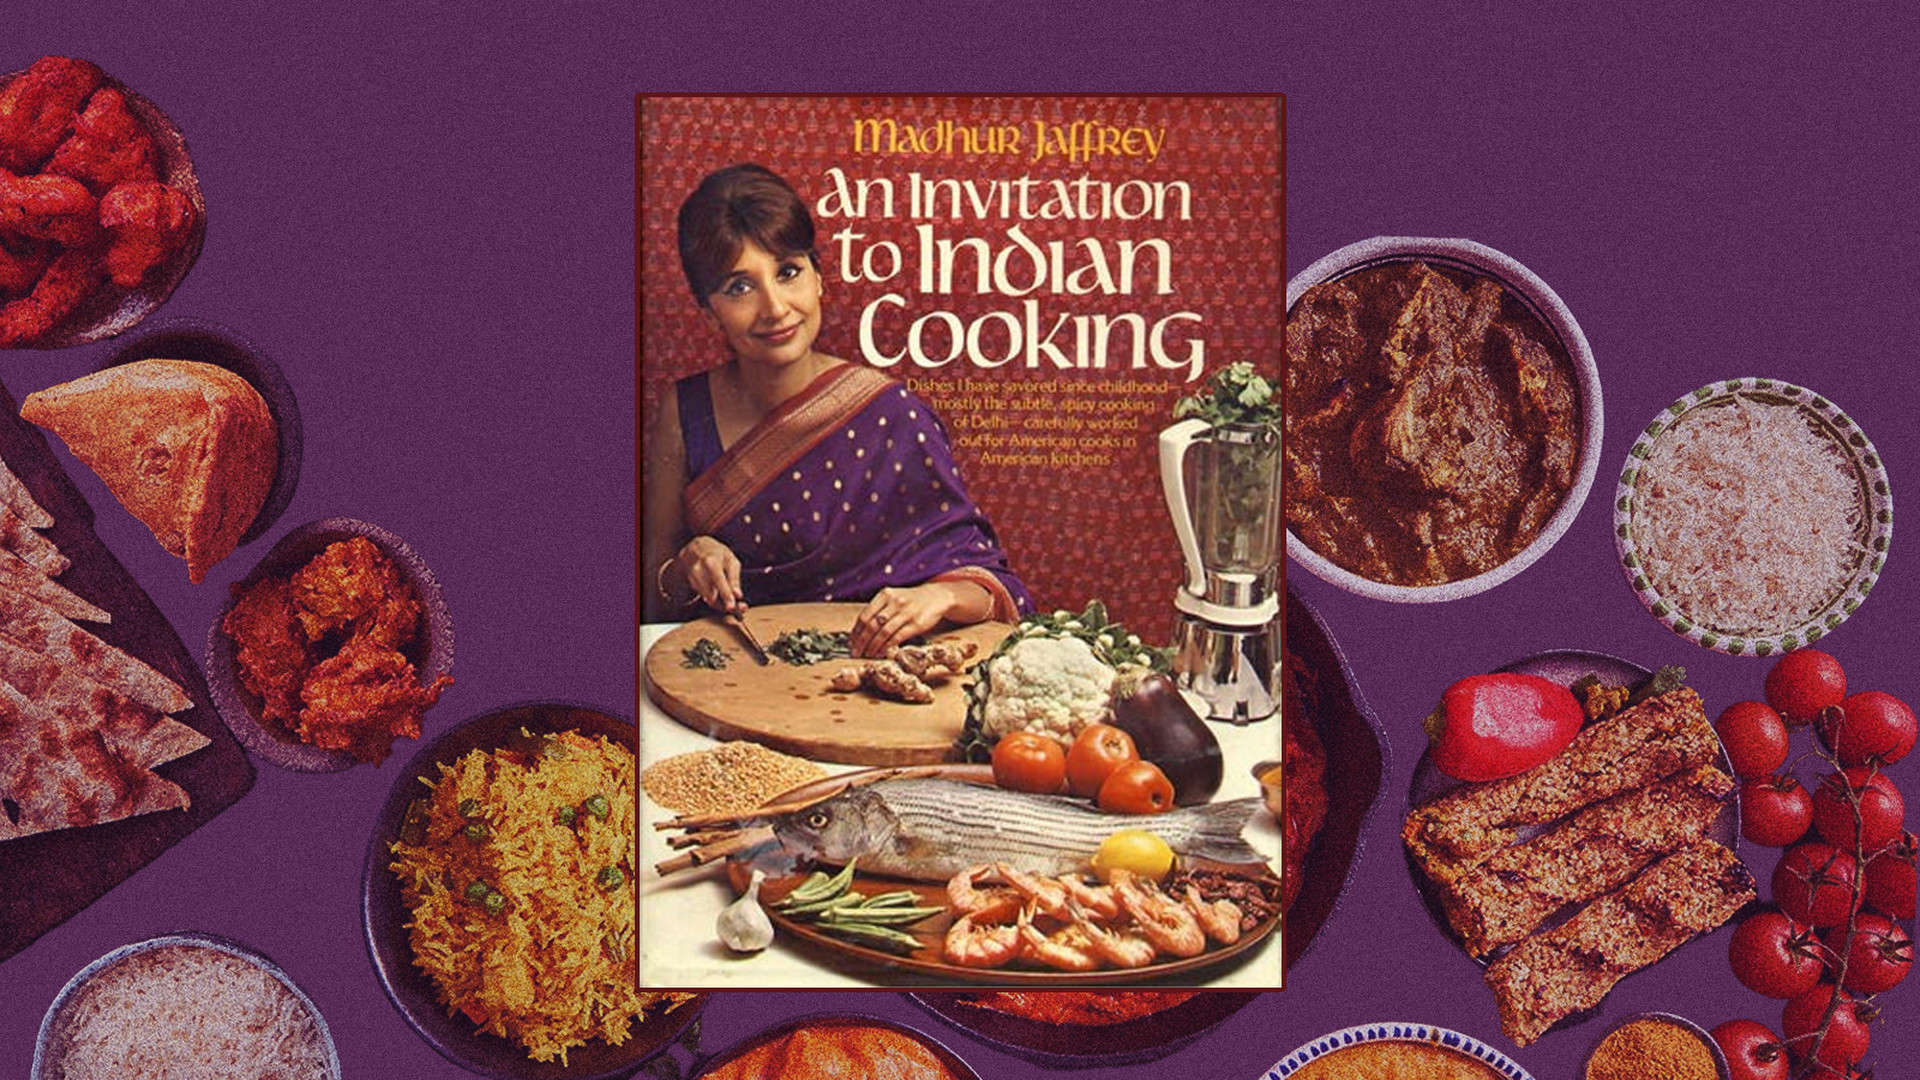 Madhur Jaffrey’s ‘An Invitation to Indian Cooking’ Introduced Many Americans to a Complex Culinary Tradition